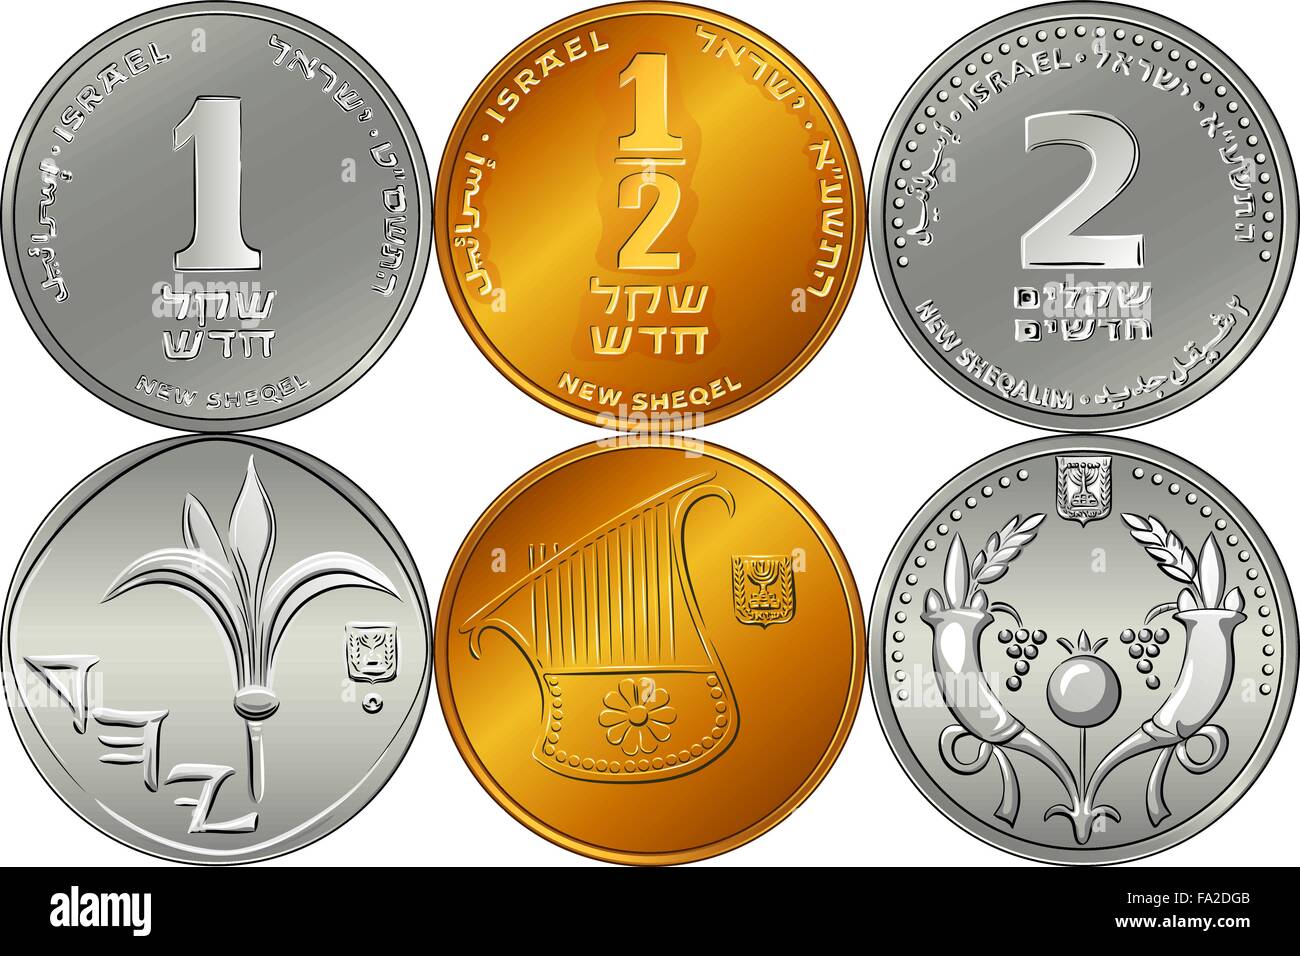 Agora coin israel Stock Vector Images - Alamy